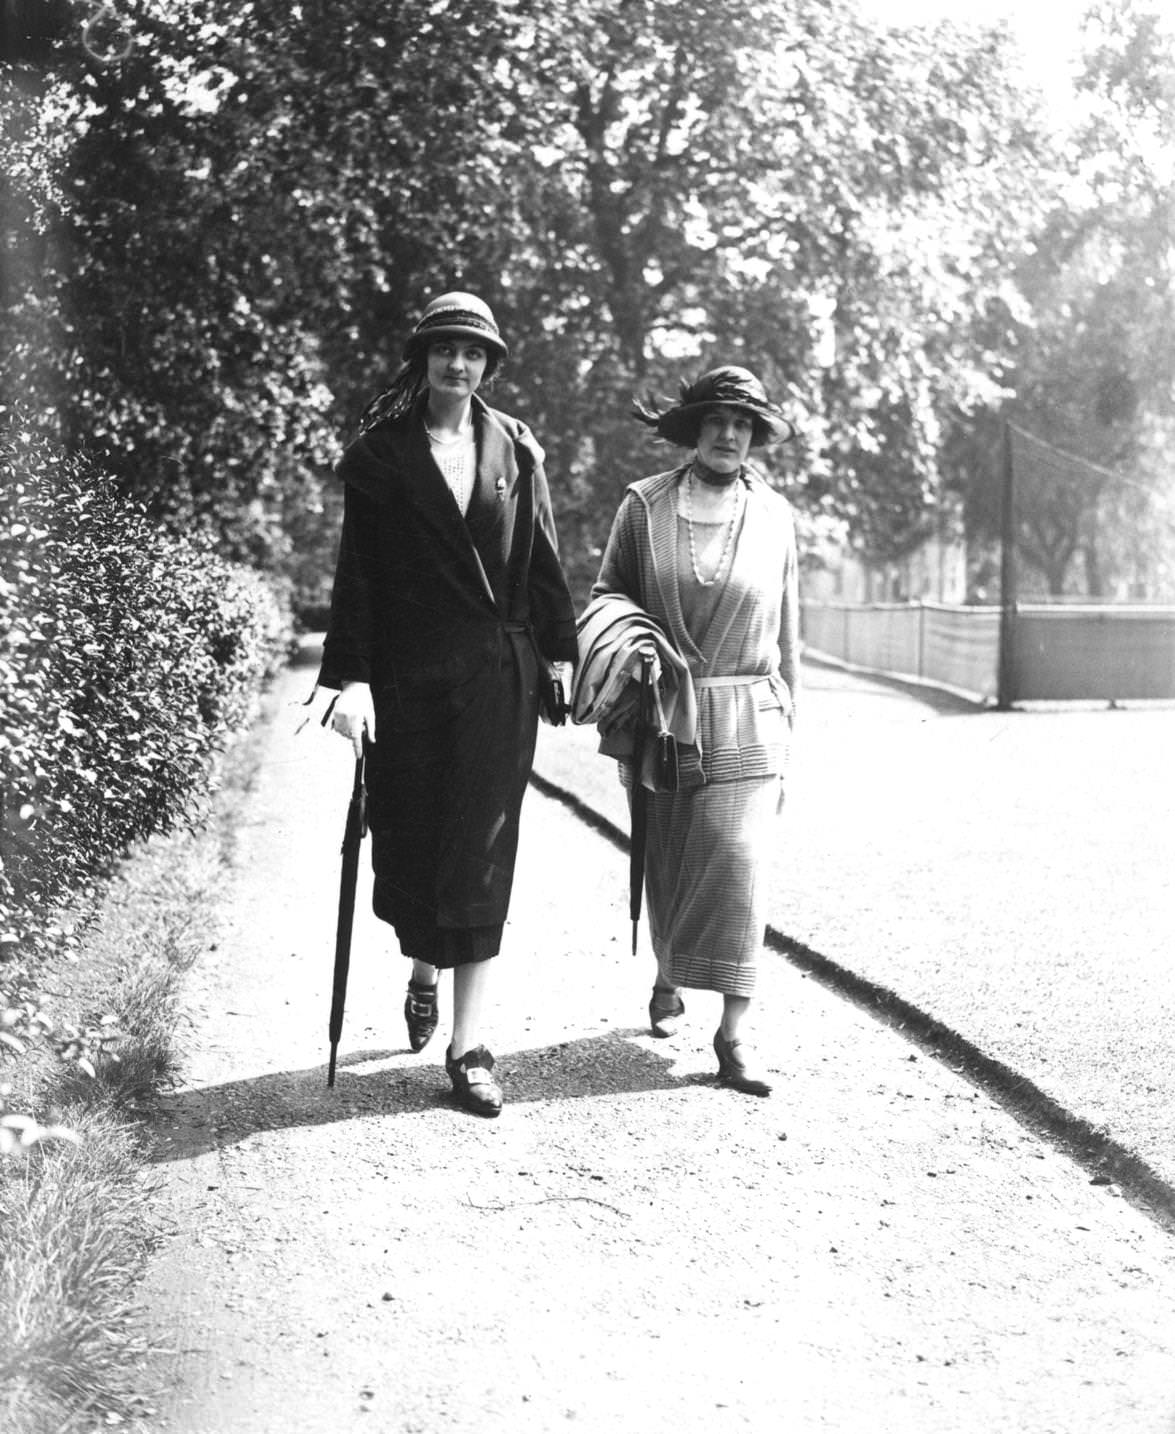 Two formally dressed women walking through Regent's Park, London on their way to Lady Beatty's tennis and garden party at Hanover Lodge in the park, 1924